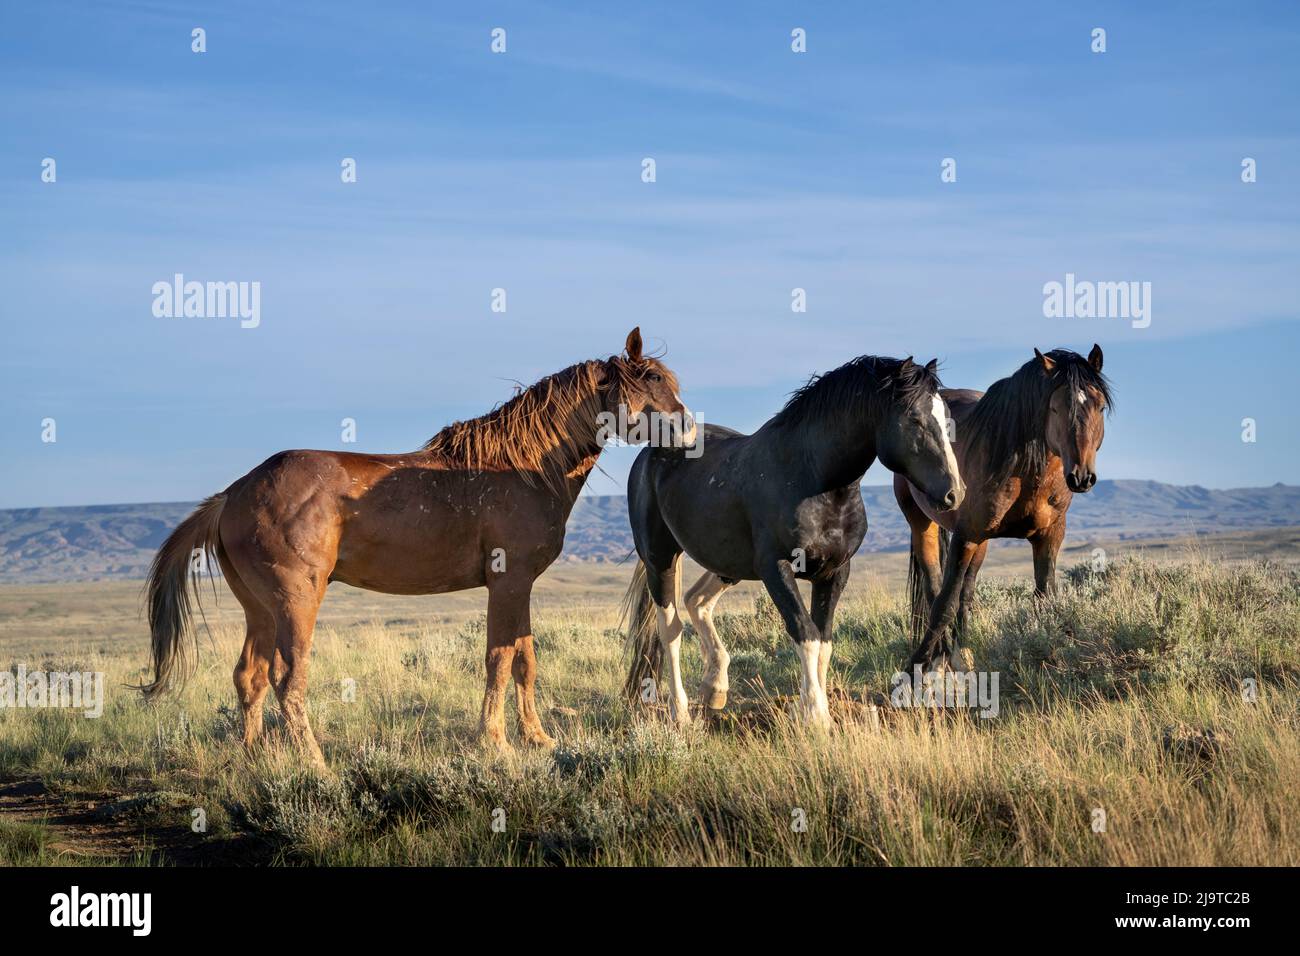 USA, Wyoming. Close-up of wild horses in field. Stock Photo